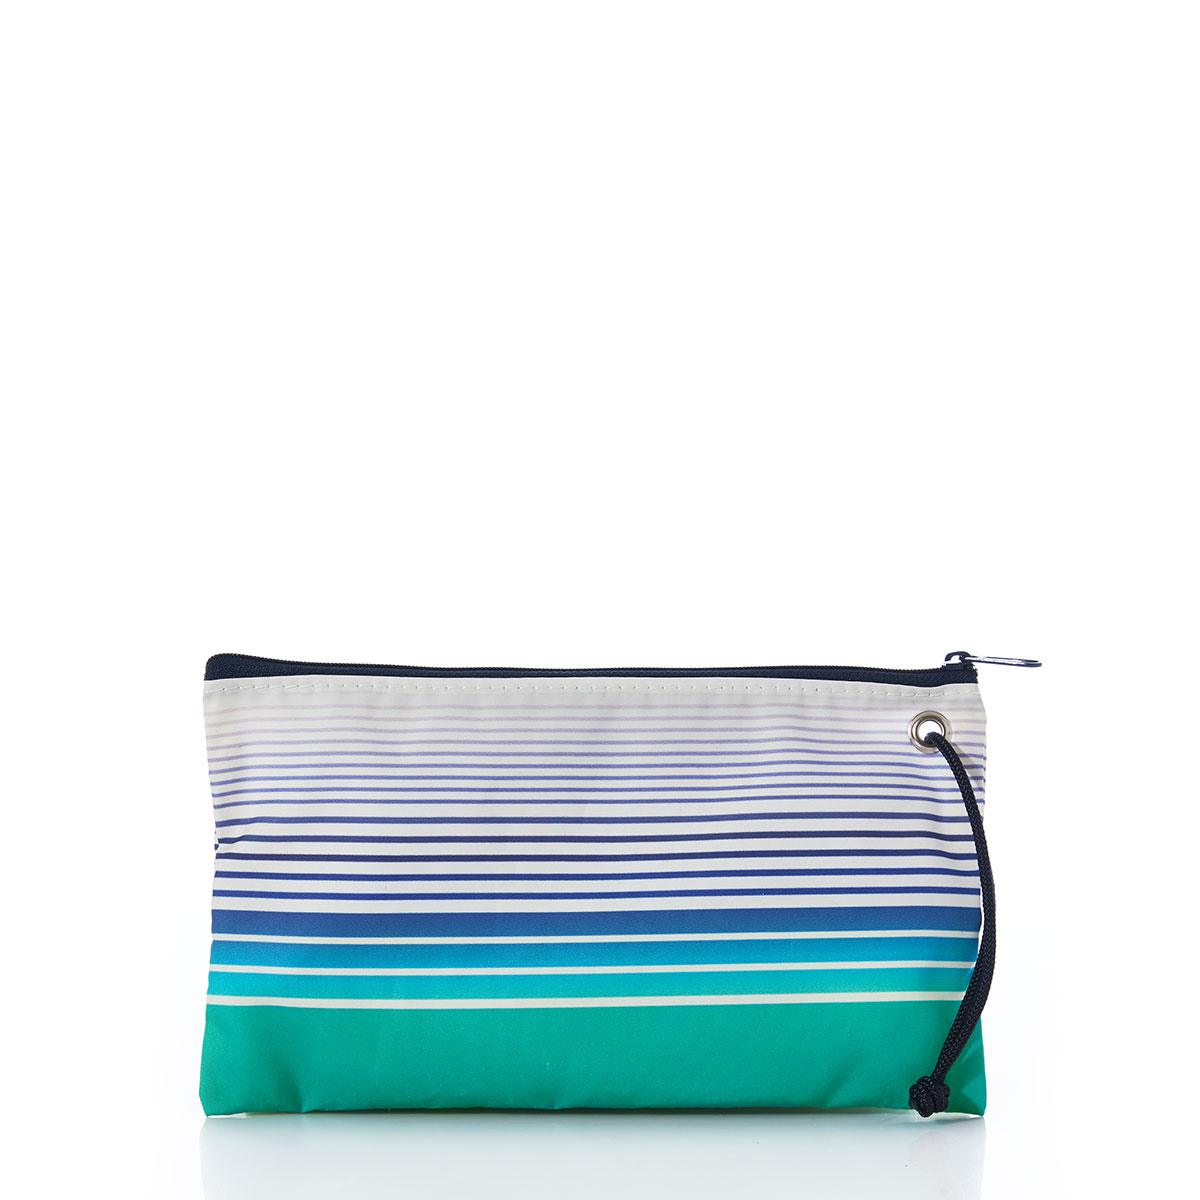 a recycled sail cloth large wristlet is printed with ombre stripes of blue into green with a solid green bottom